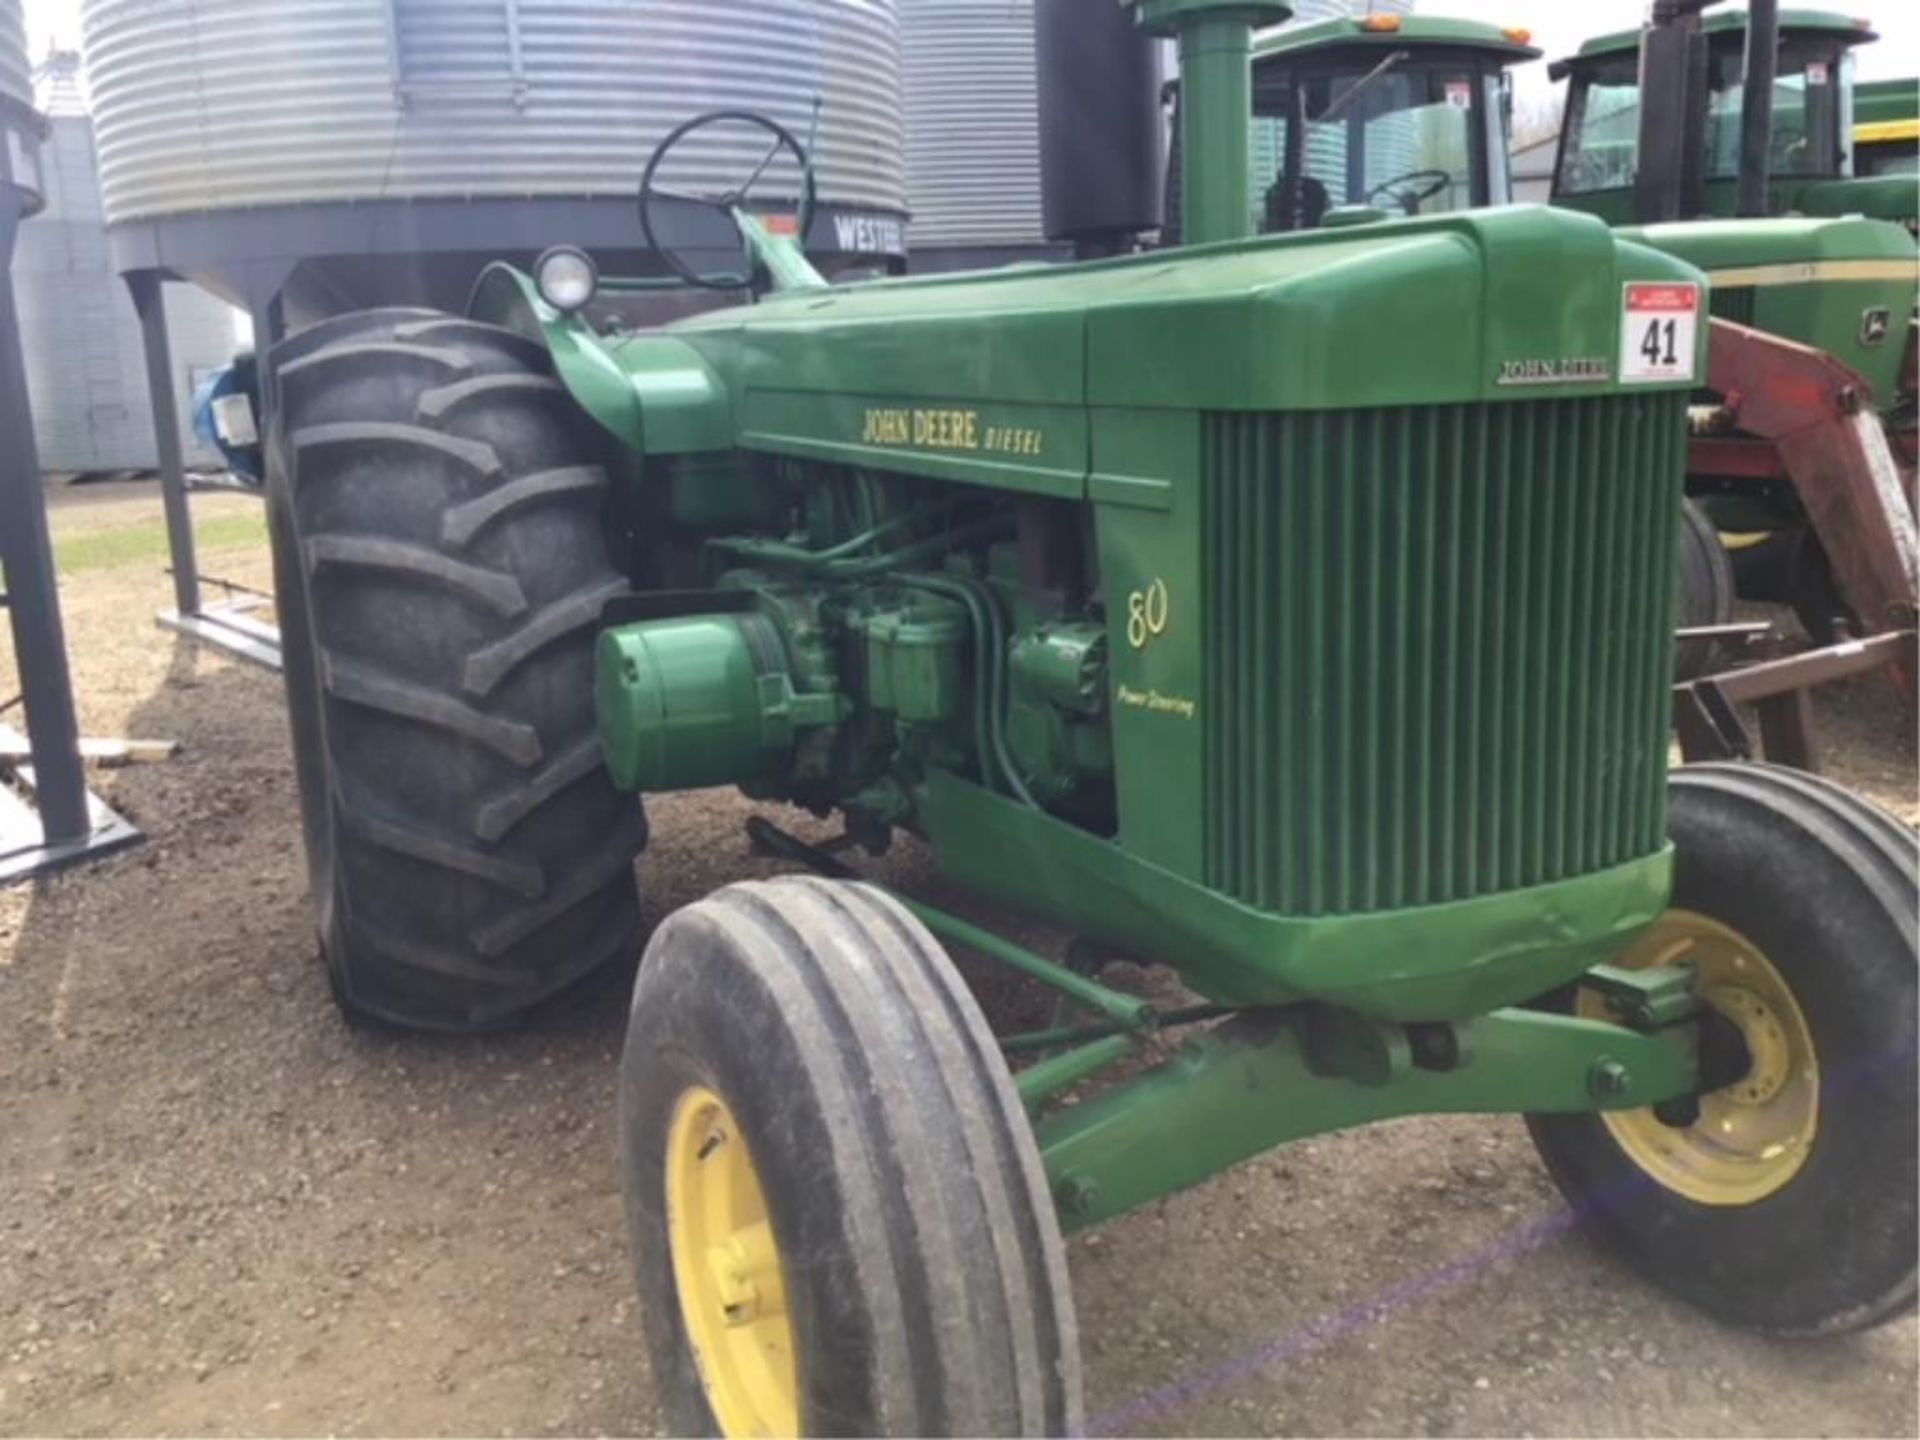 80 John Deere Antique Tractor 2wd, 2cyl diesel, Stn Trans, 540PTO, 2hyd outlets, 60hp, 23.1-26rr, - Image 2 of 5